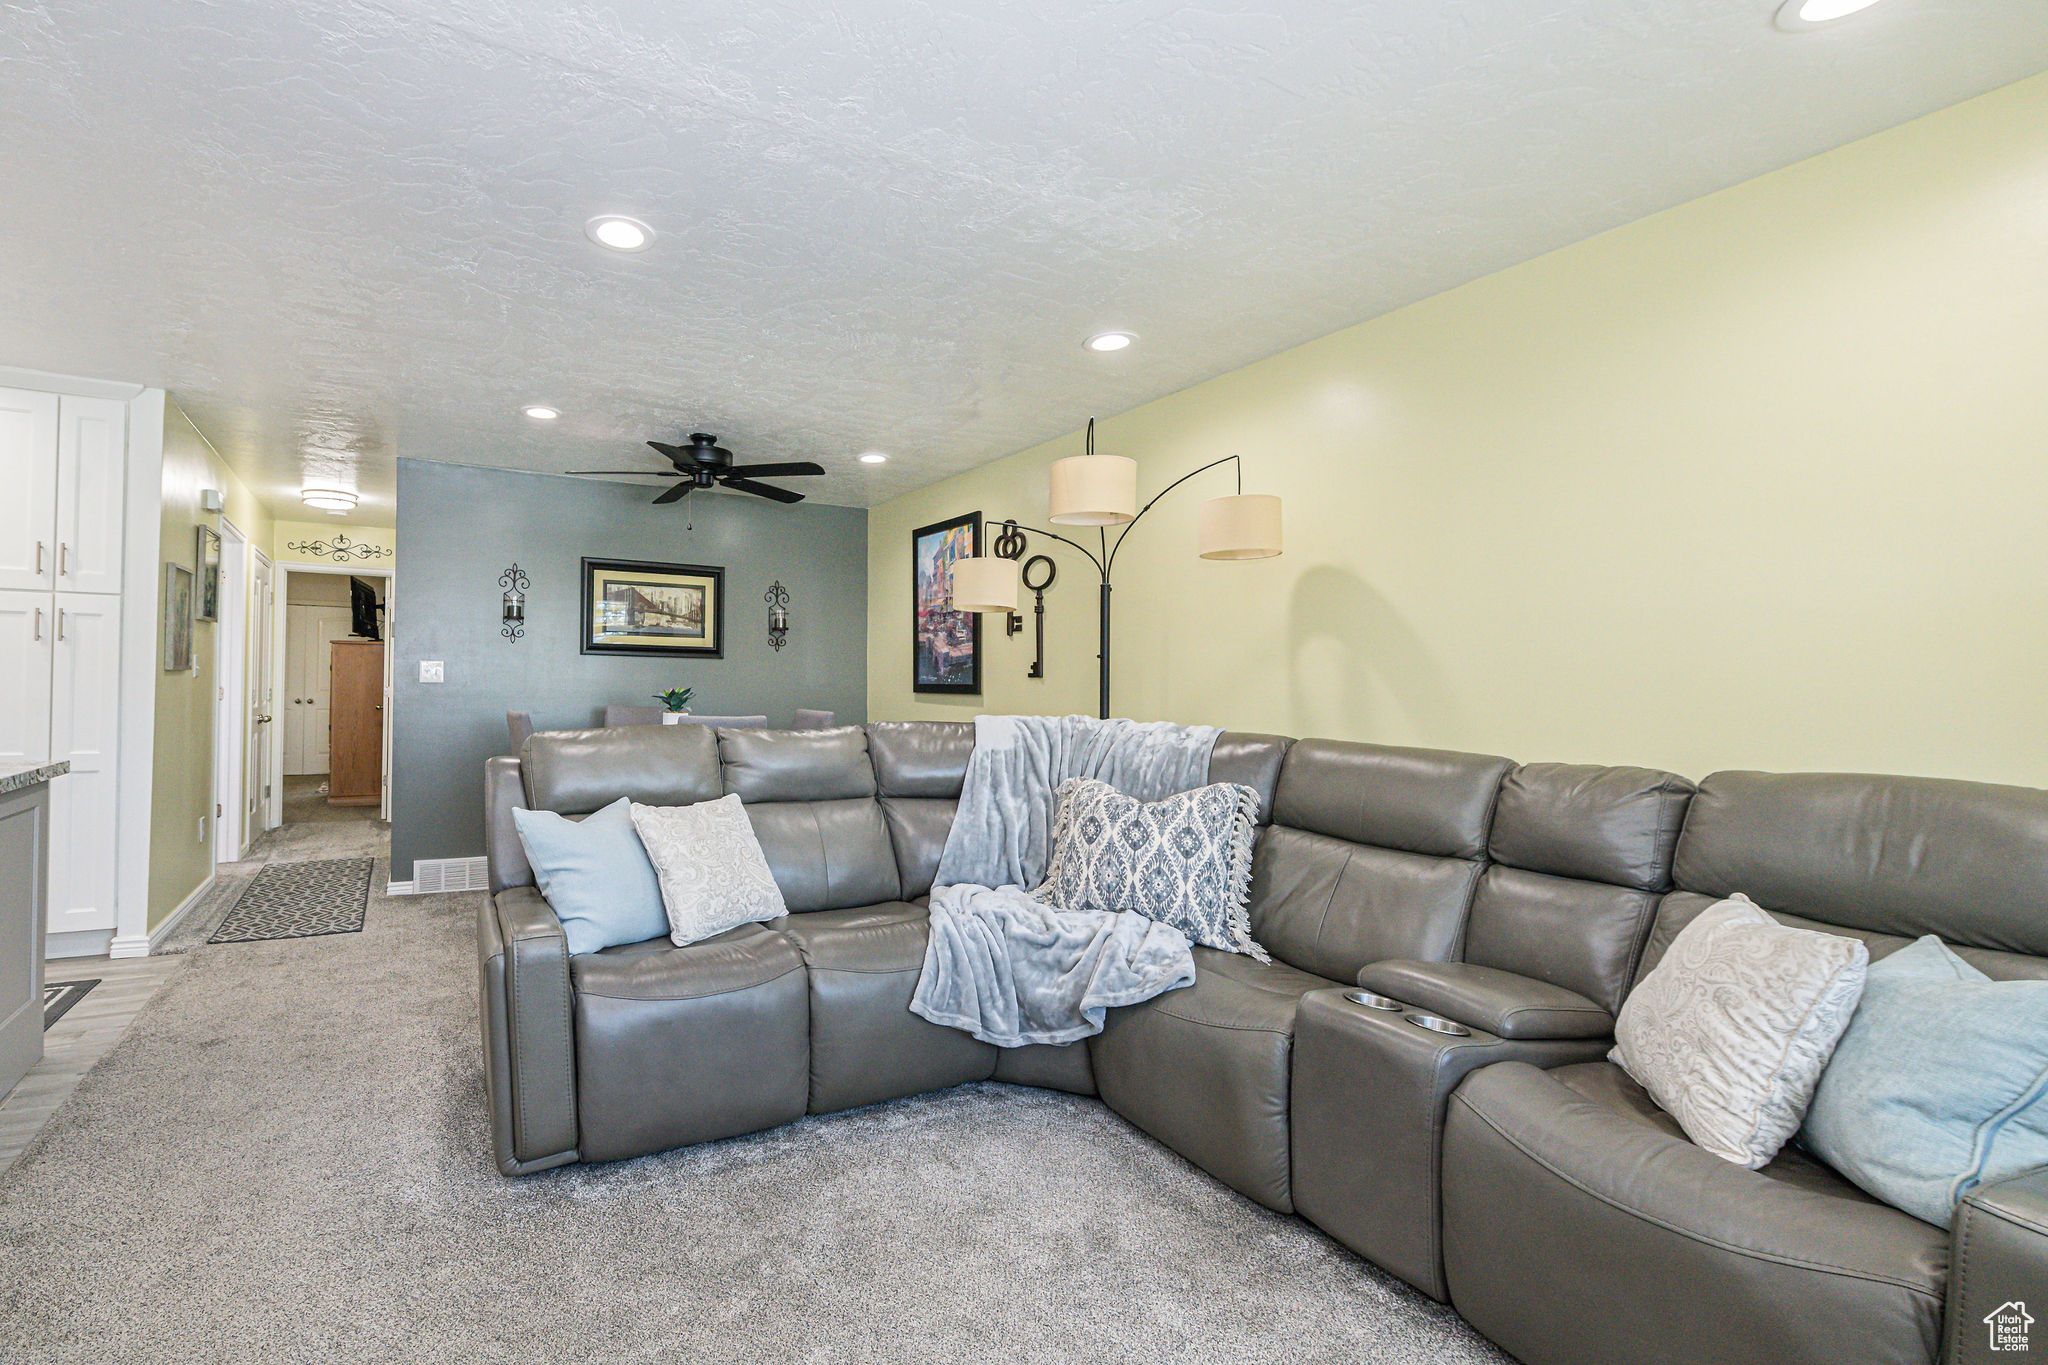 Interior space featuring light carpet, ceiling fan, and a textured ceiling